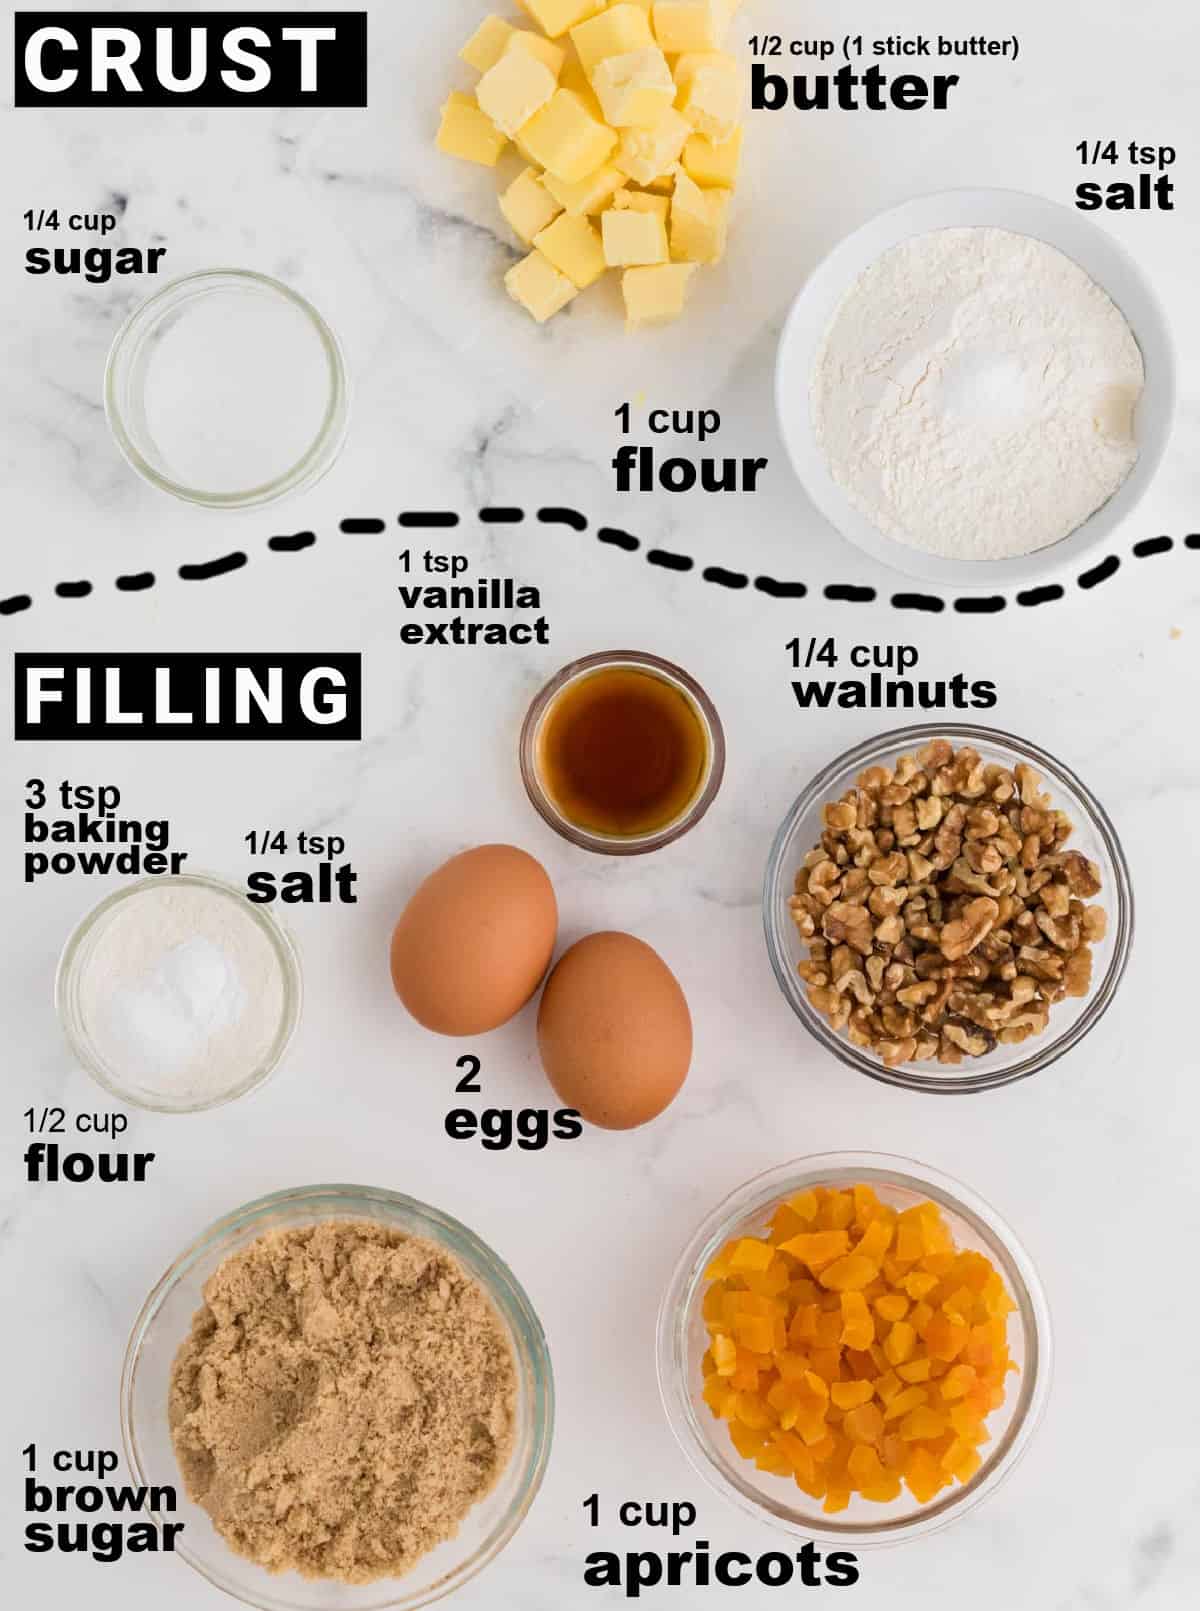 Ingredients needed to make Apricot Bars.